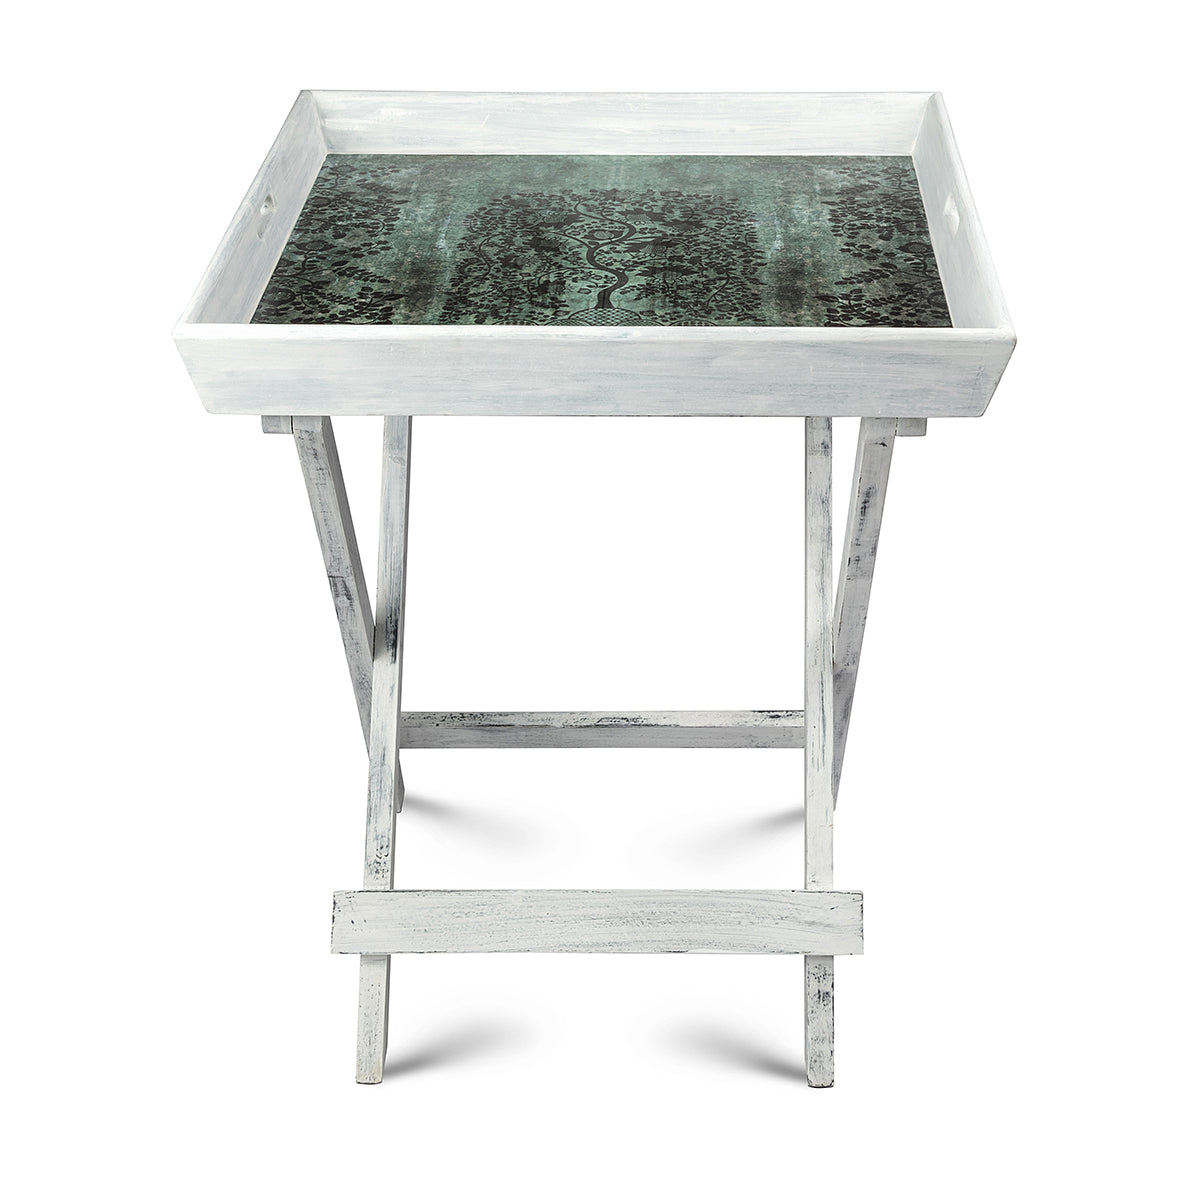 The Tree of Life Split Butler Table